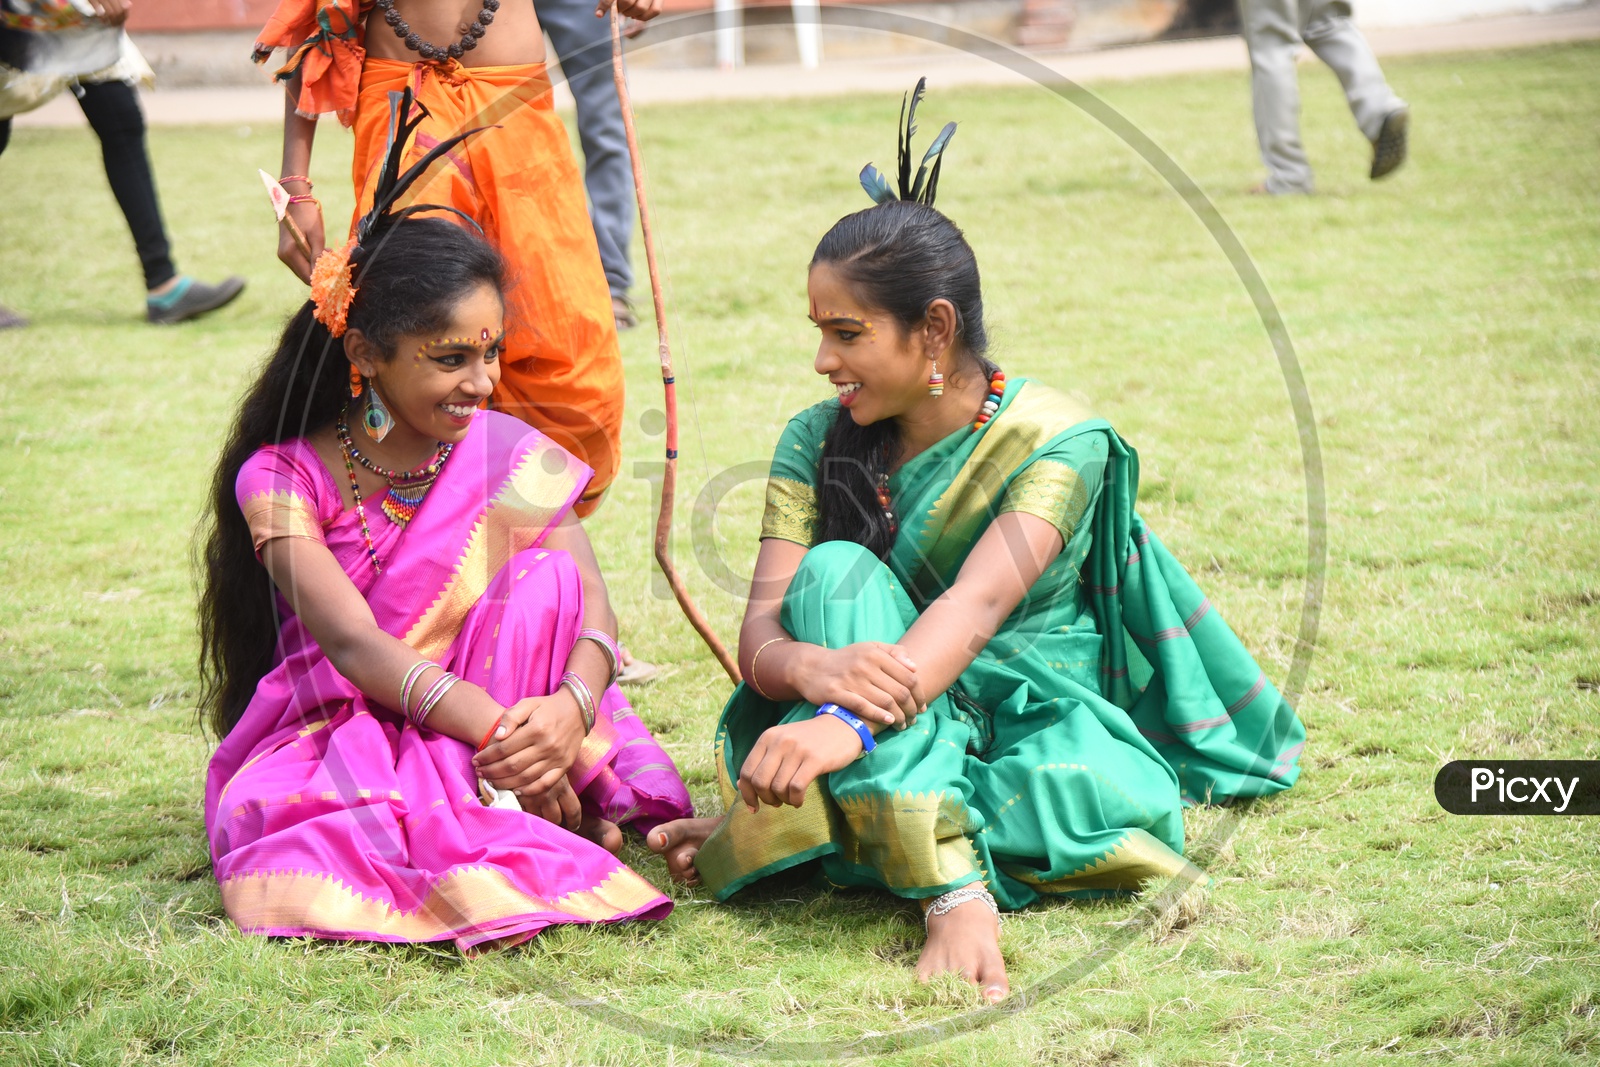 Two Costumed girls sitting on the lawn